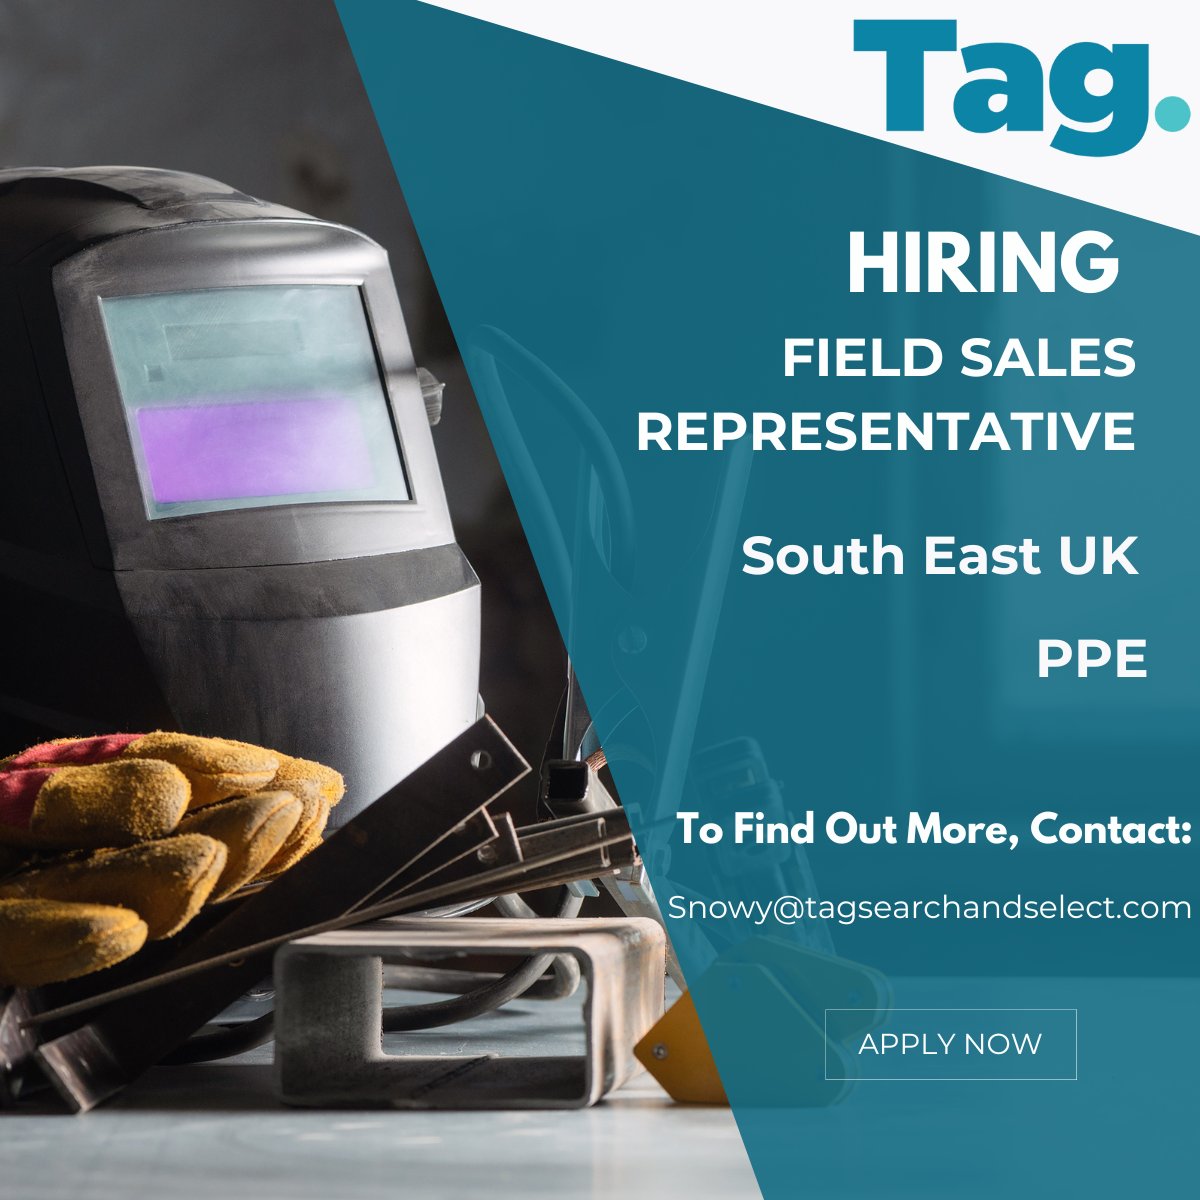 HIRING!

Field Sales Representative | South East UK | PPE

For more information, contact: snowy@tagsearchandselect.com

#tagsearchandselect #FieldSales #SouthEastUK #PPE #UKJobs #SalesOpportunity